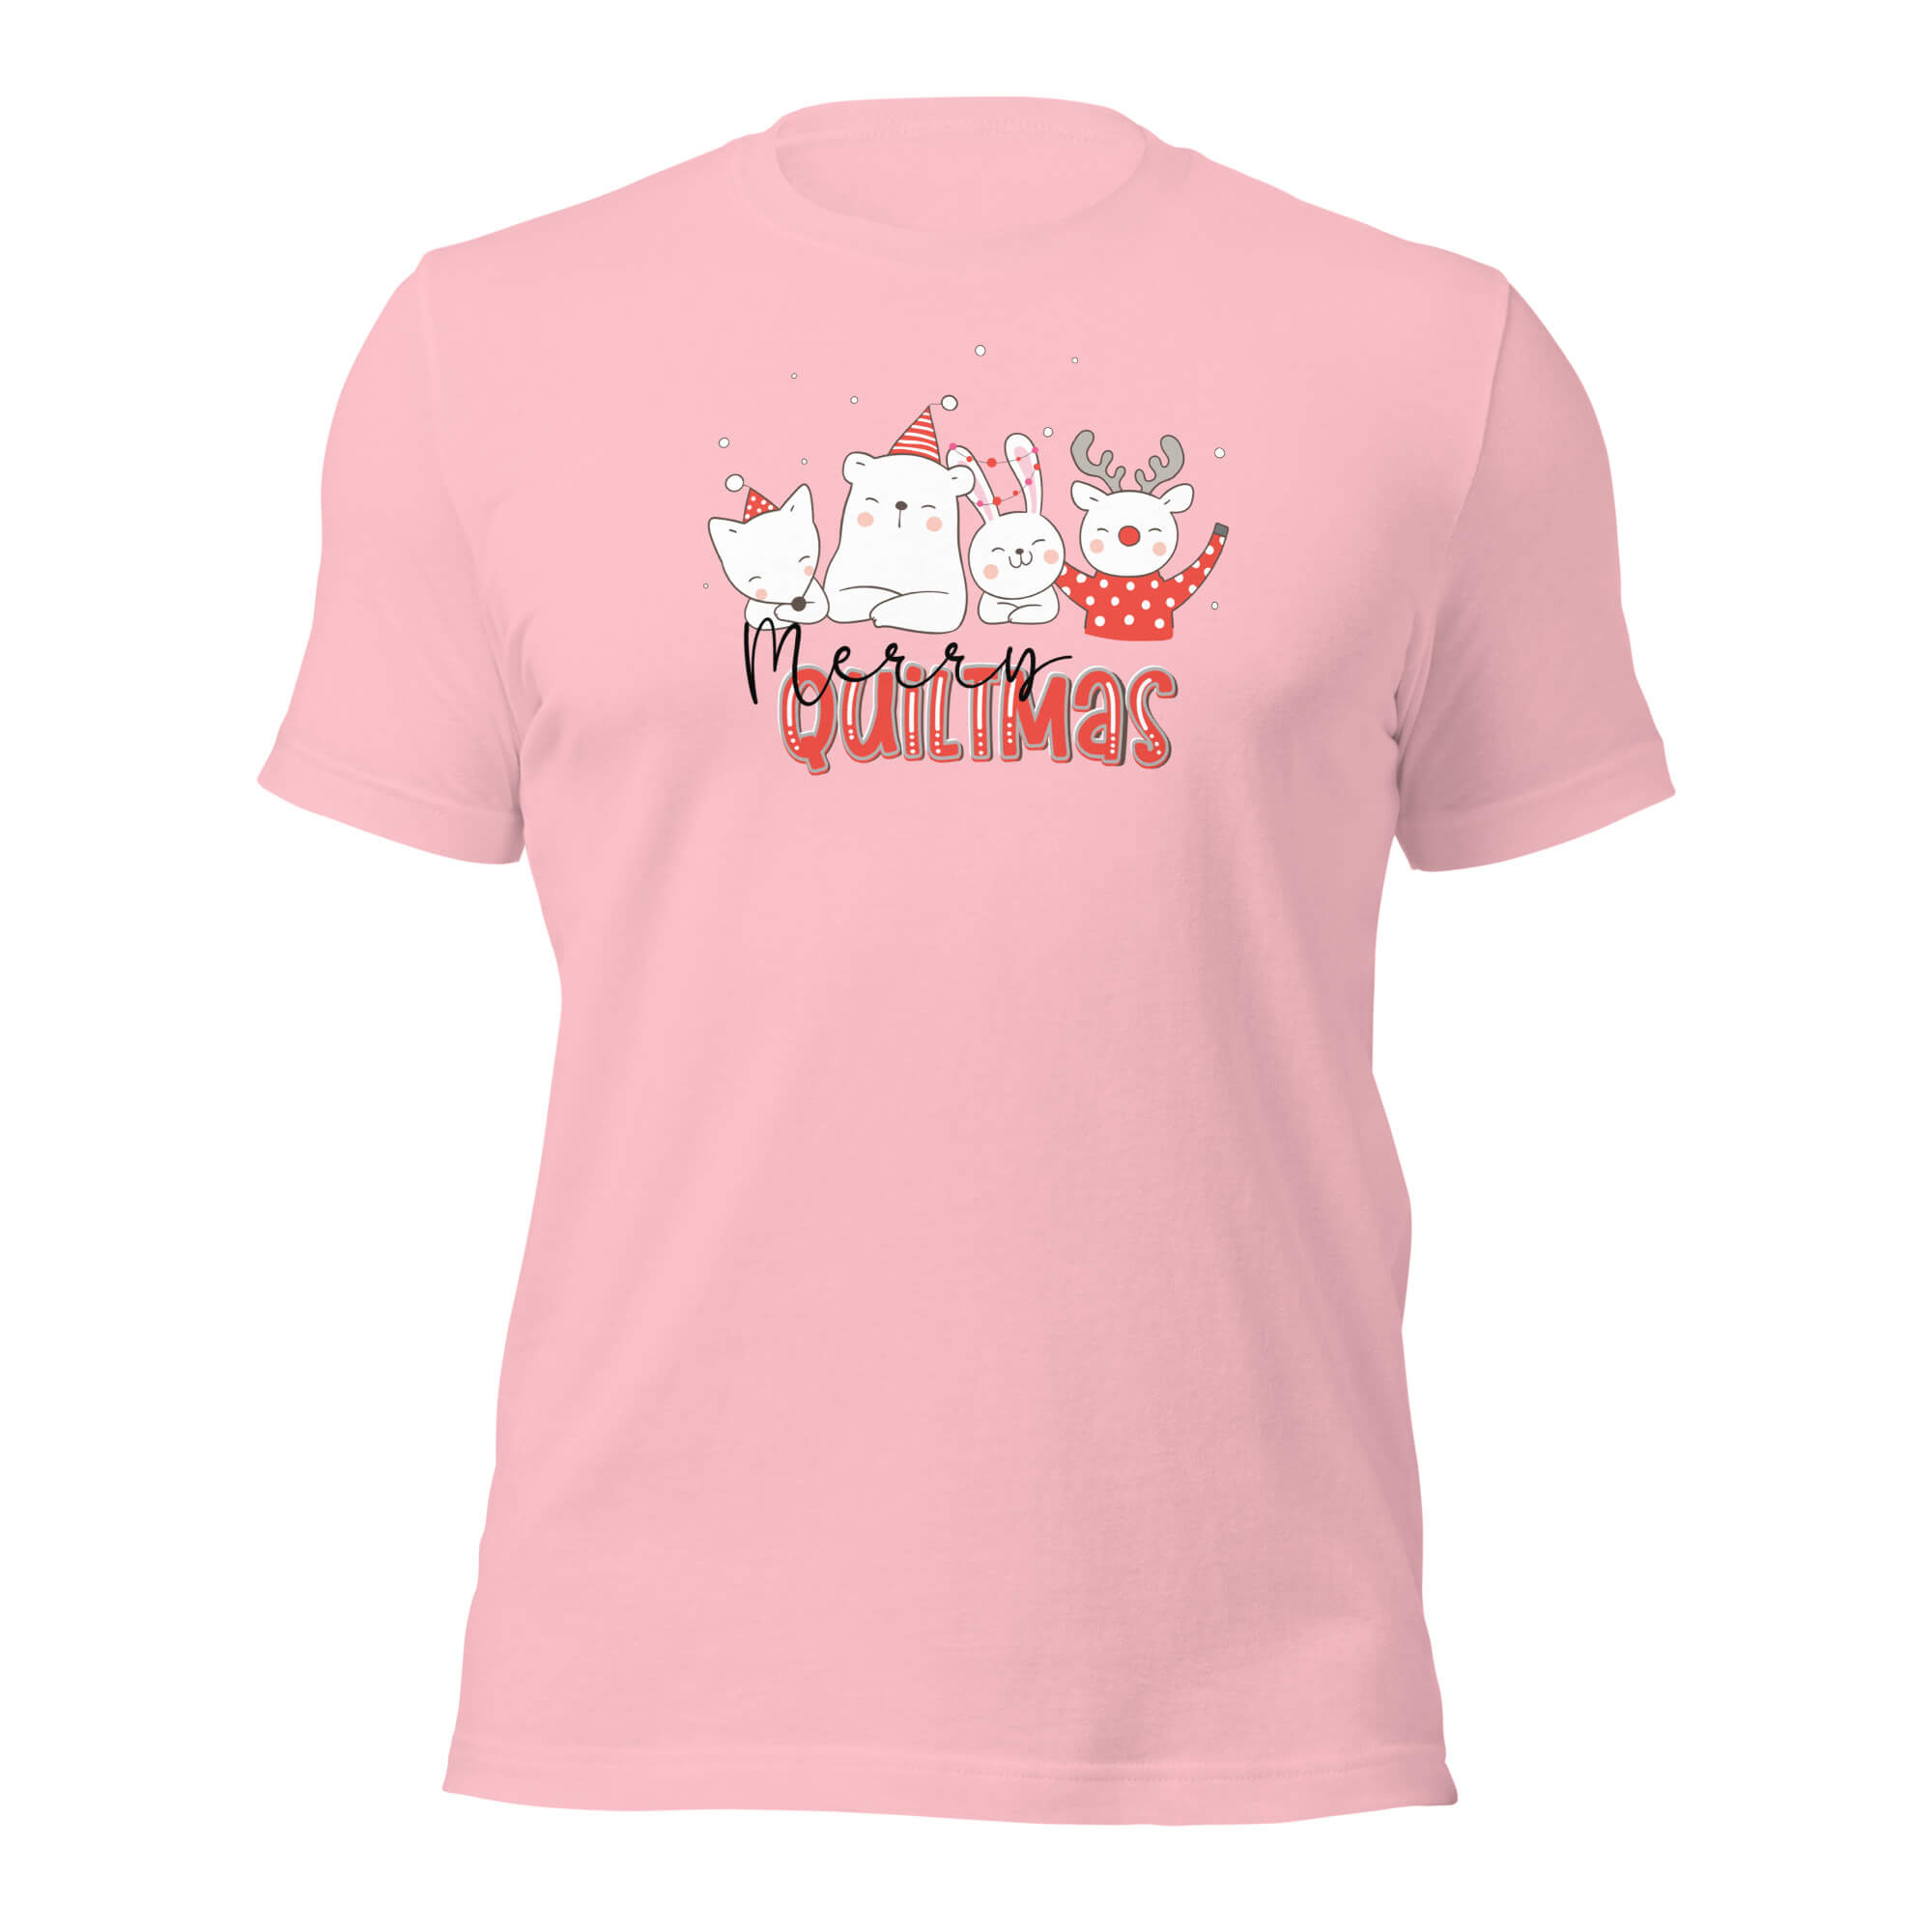 merry-quiltmas-t-shirt-pink